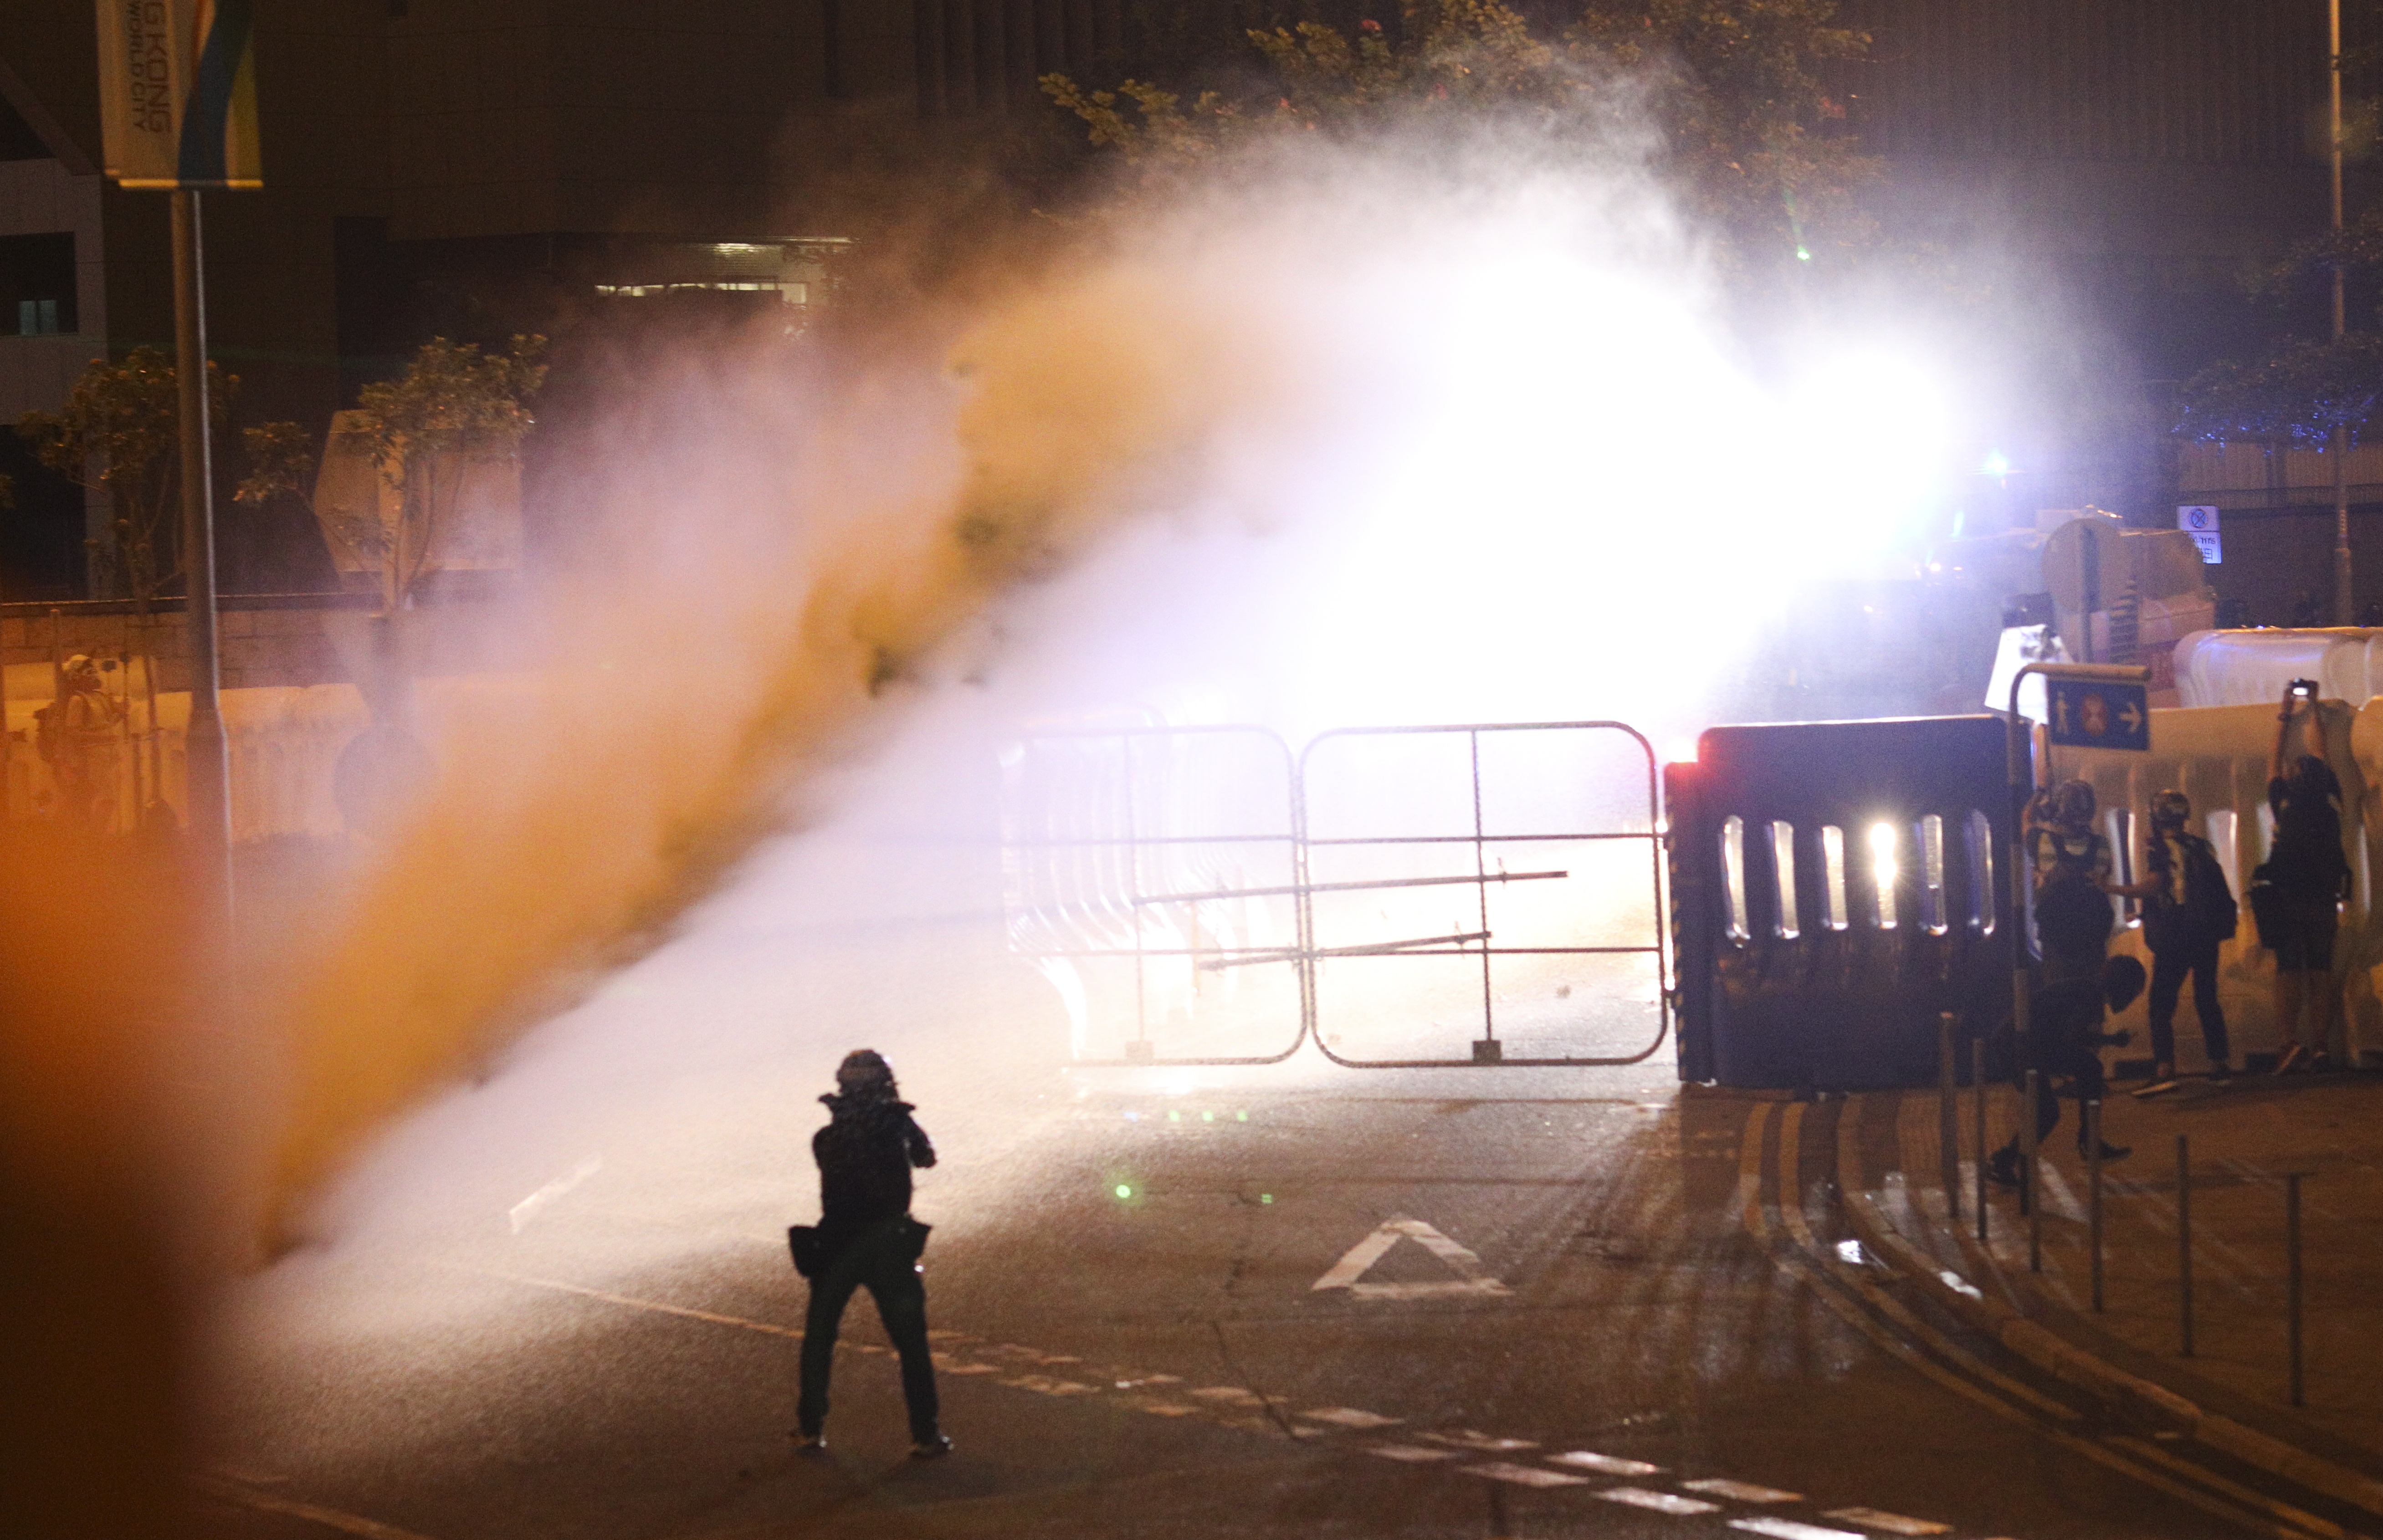 epa07876363 Police fire water canon toward protesters during a rally commemorating the 5th anniversary of the 'Umbrella Revolution' in Hong Kong, China, 28 Sept. 2019. In 2014 a series and sit-ins and protests, nicknamed the 'Umbrella Revolution' or 'Umbrella Movement', began after China's Standing Committee of the National People's Congress issued a decision regarding proposed reforms to the Hong Kong electoral system. Hong Kong has entered its fourth month of mass protests, originally triggered by a now suspended extradition bill to mainland China that have turned into a wider pro-democracy movement.  EPA/JEROME FAVRE